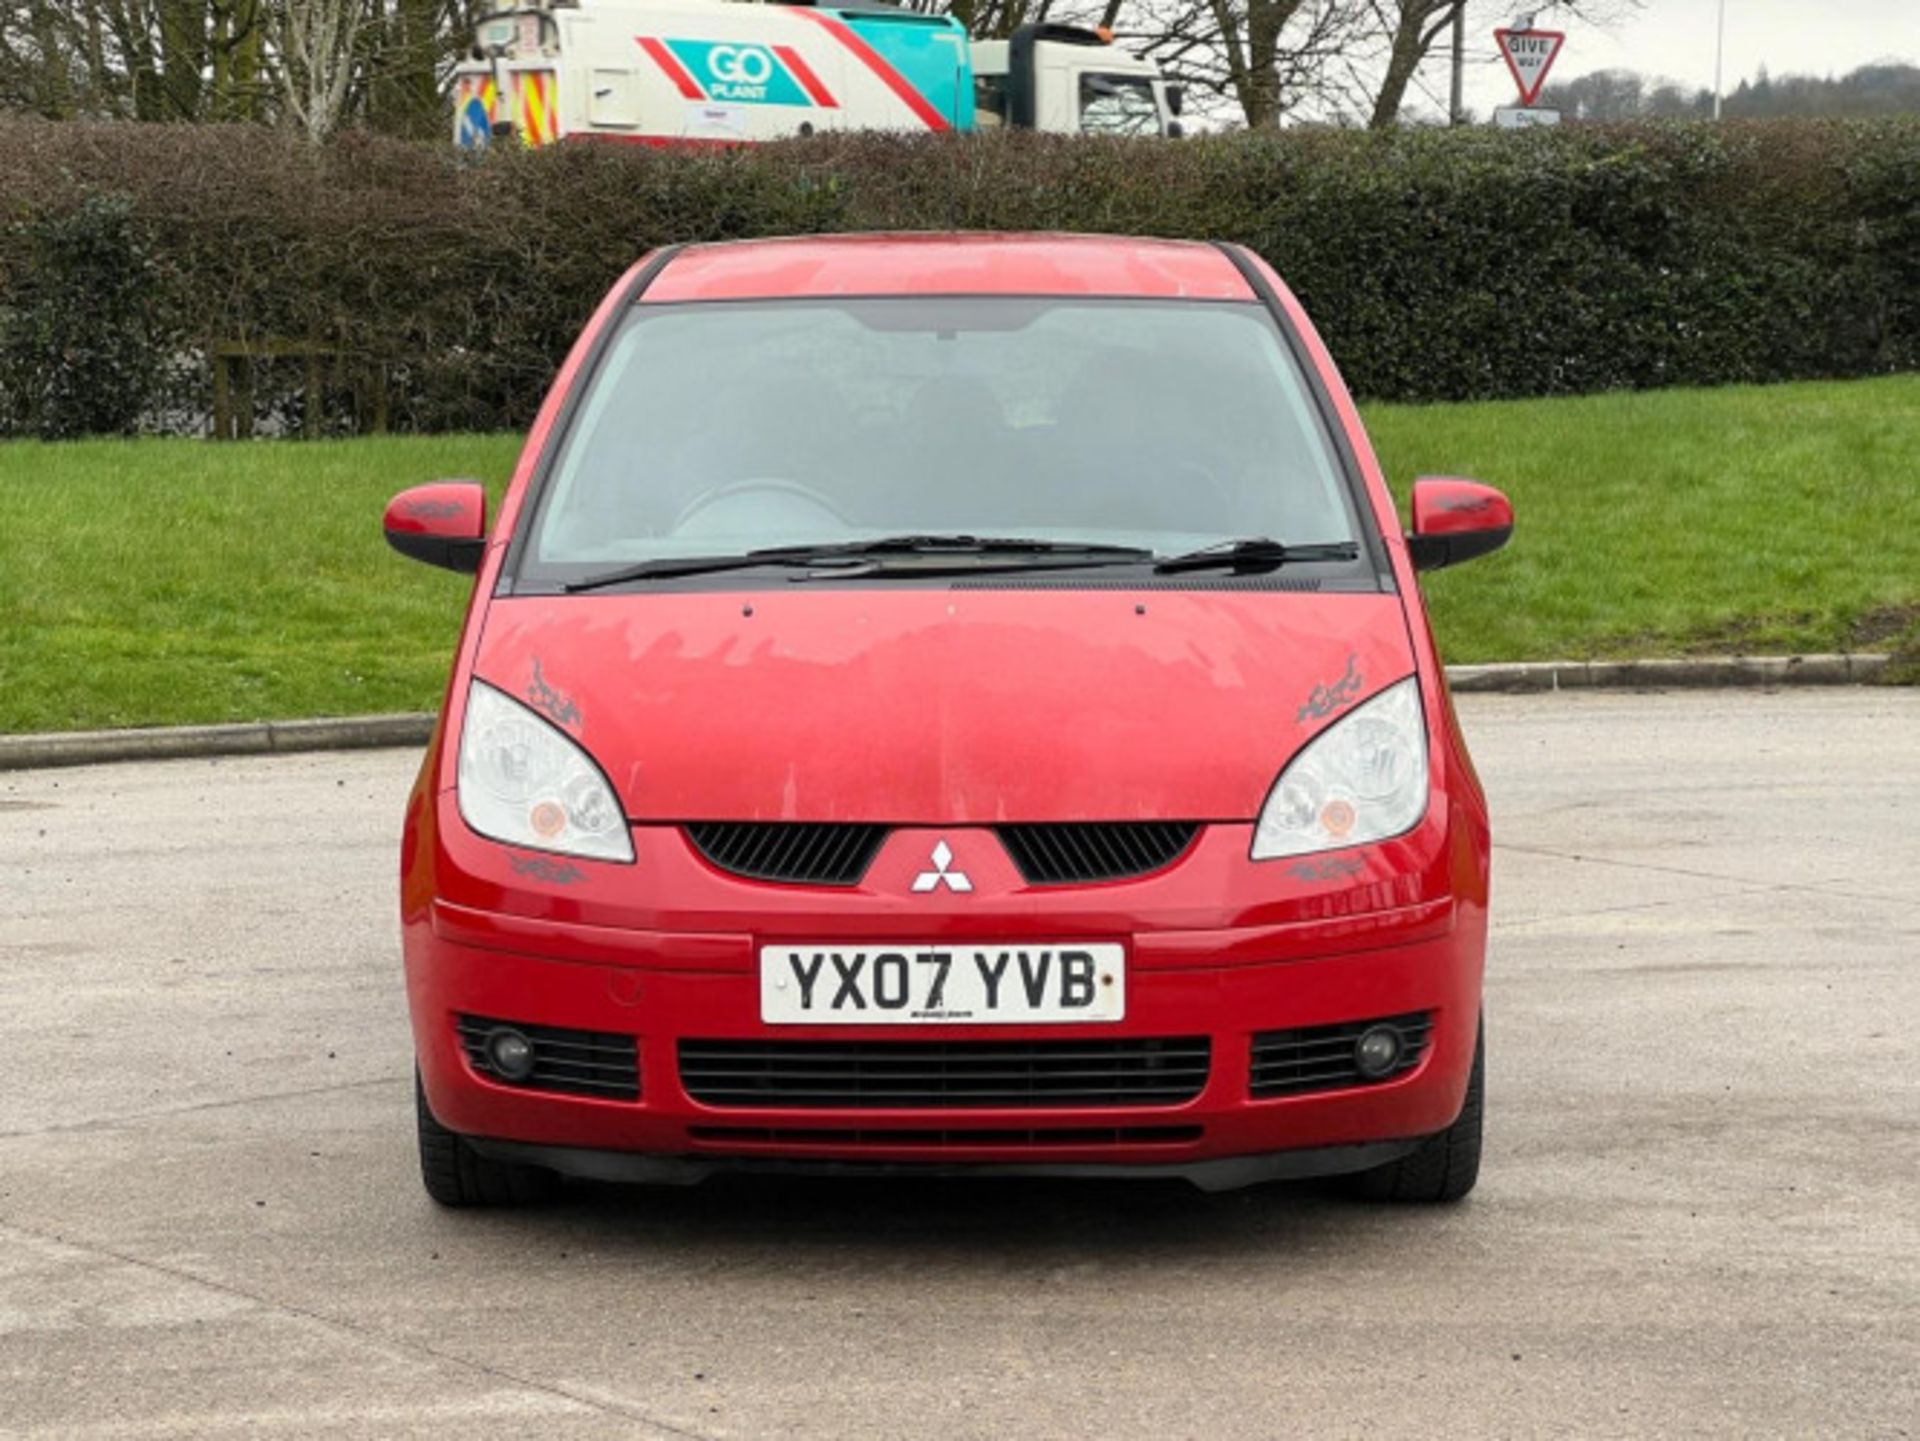 2007 MITSUBISHI COLT 1.5 DI-D DIESEL AUTOMATIC >>--NO VAT ON HAMMER--<< - Image 119 of 127